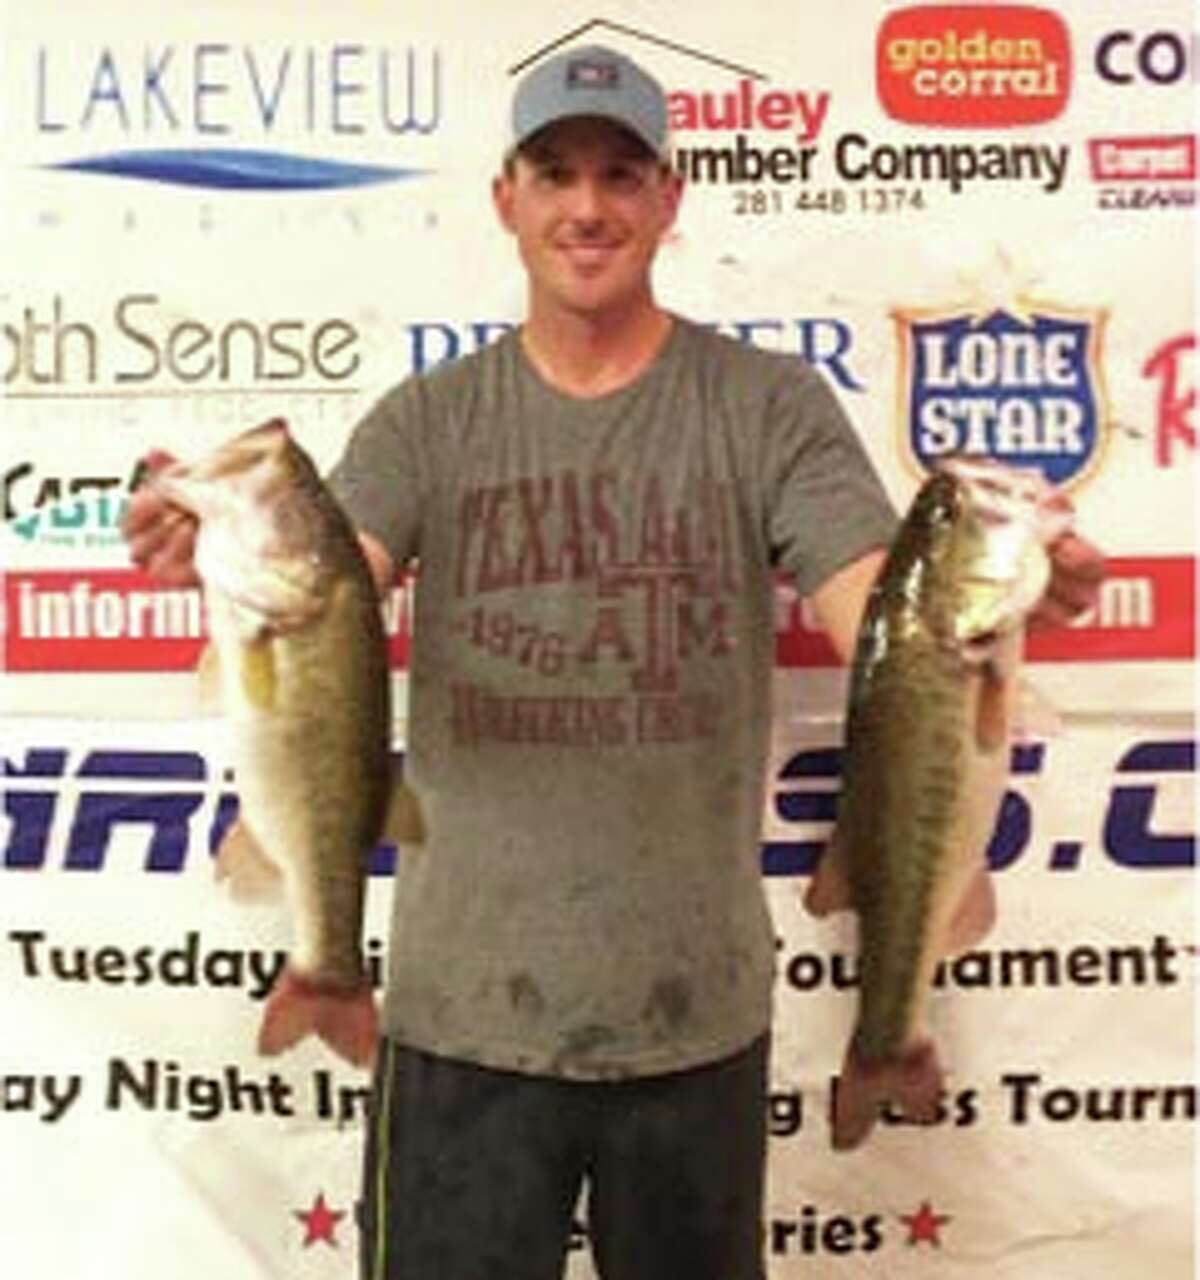 Brad Lanier came in fourth place in the CONROEBASS Tuesday Night Tournament each with a stringer weight of 7.97 pounds.